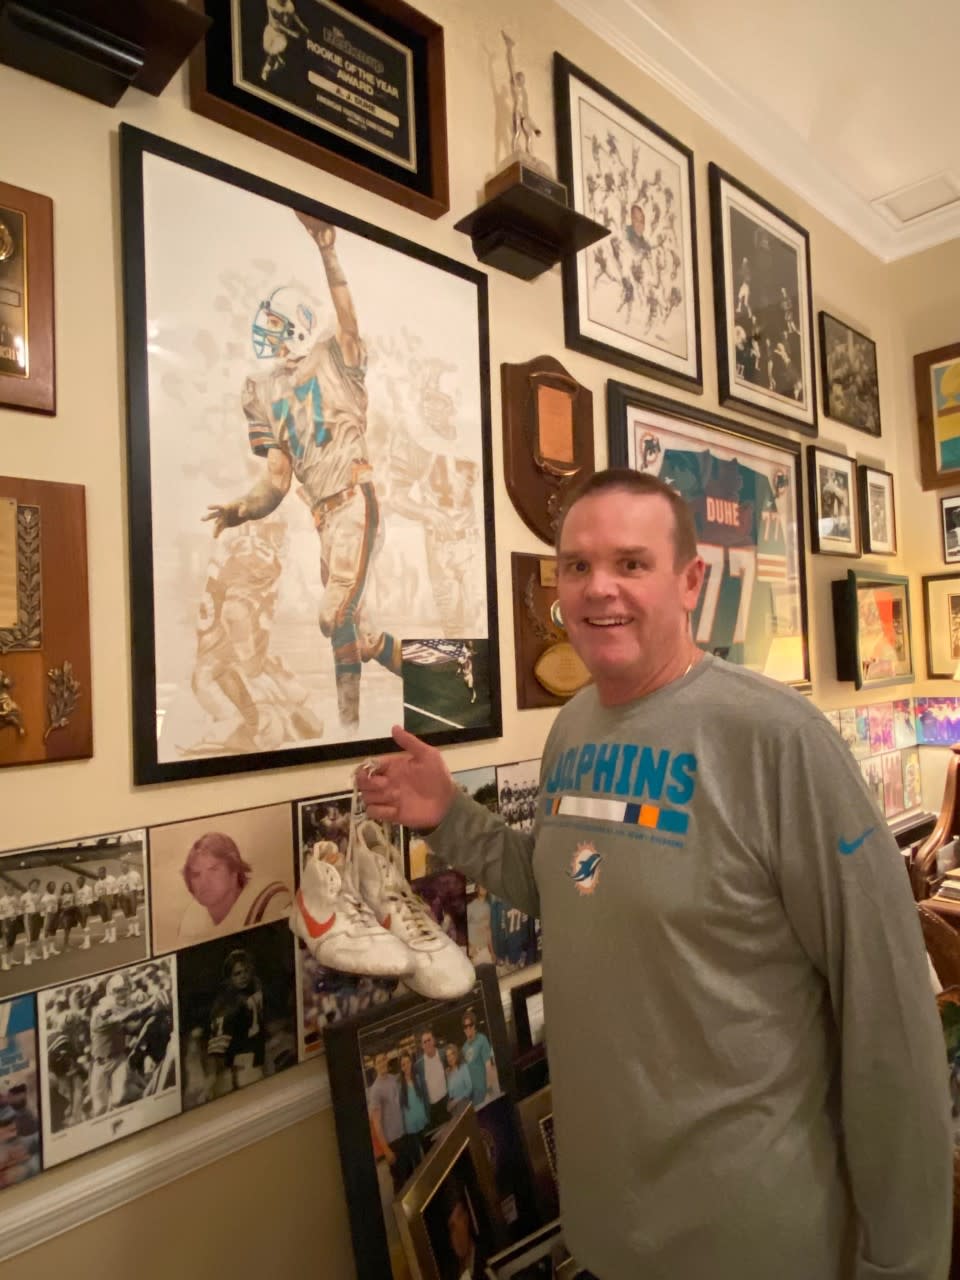 A.J. Duhe in his trophy room with the shoes from his famous game against the Jets. (Photo courtesy of Duhe)